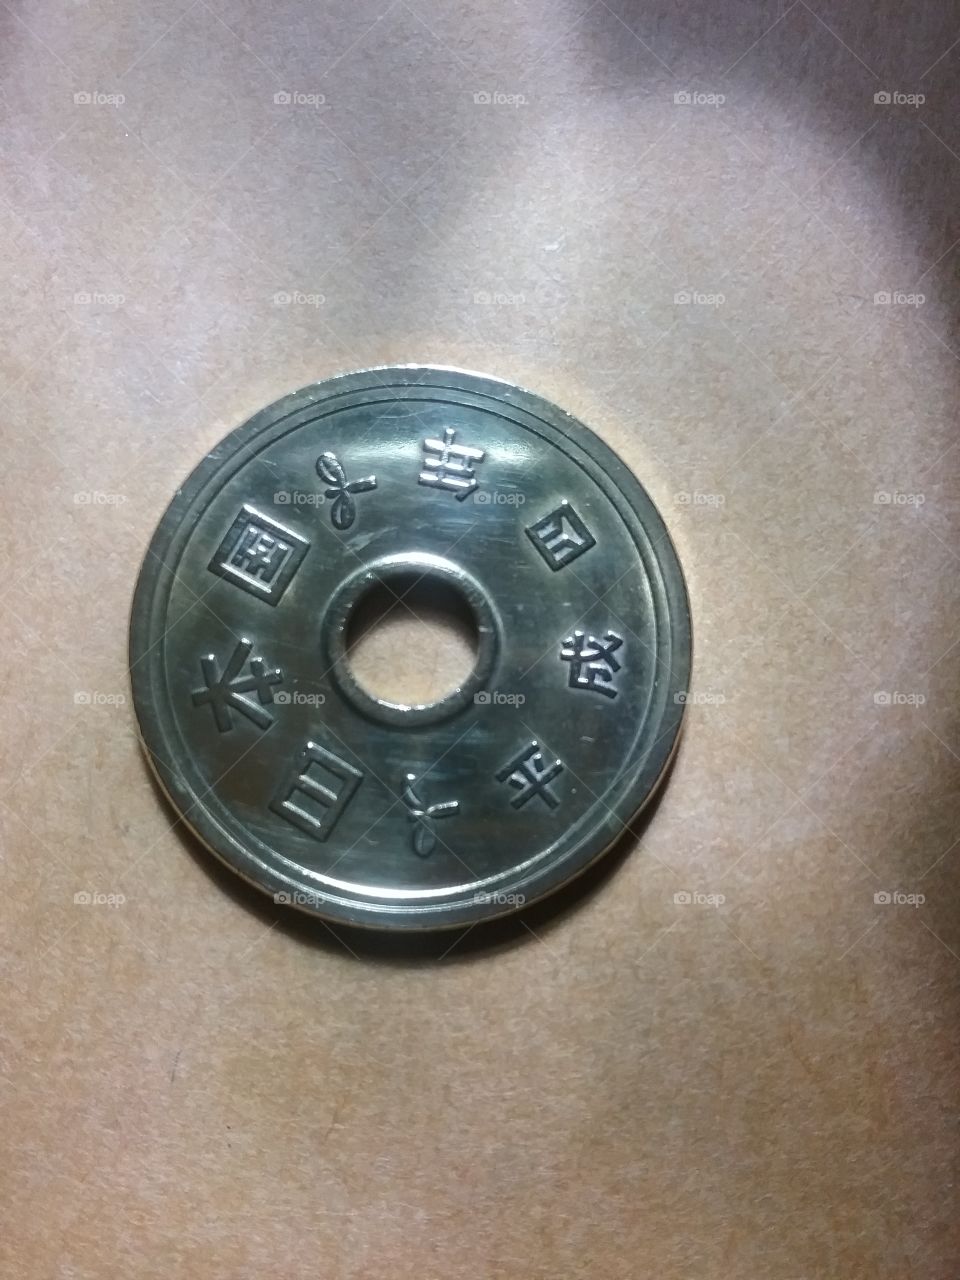 Japanese coin, 5 Yen, with new script. It was first minted in 1959. It is 1 of my coins collection.